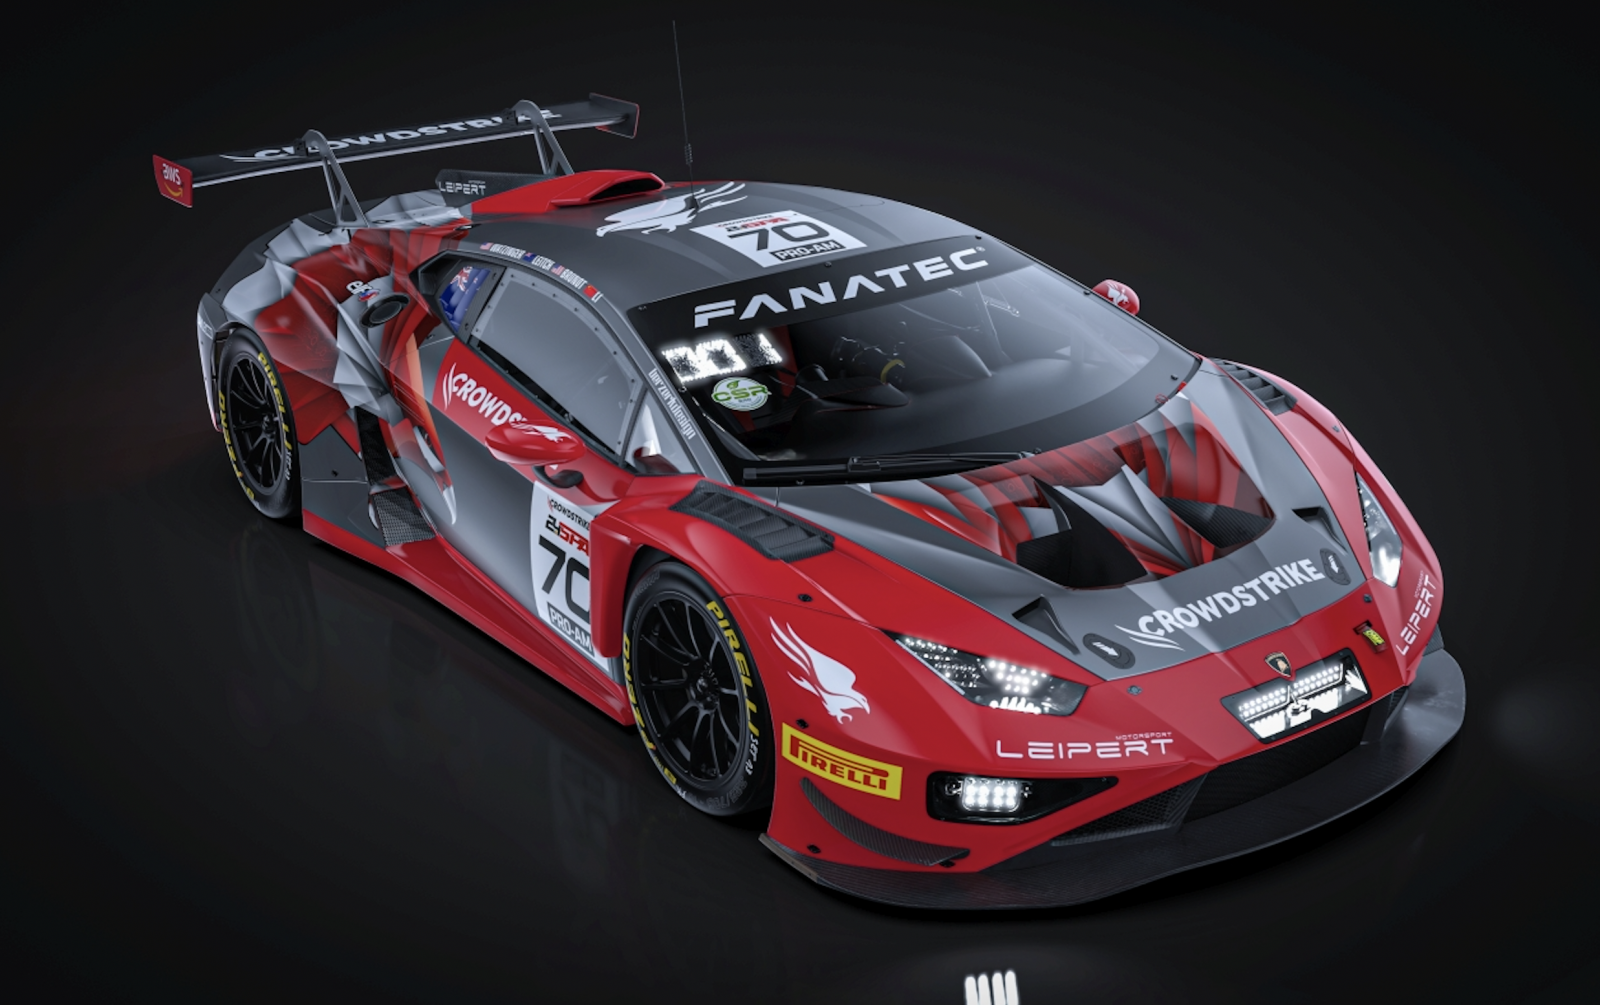 Leipert Motorsport confirms line-up for Spa assault with CrowdStrike-liveried Lamborghini